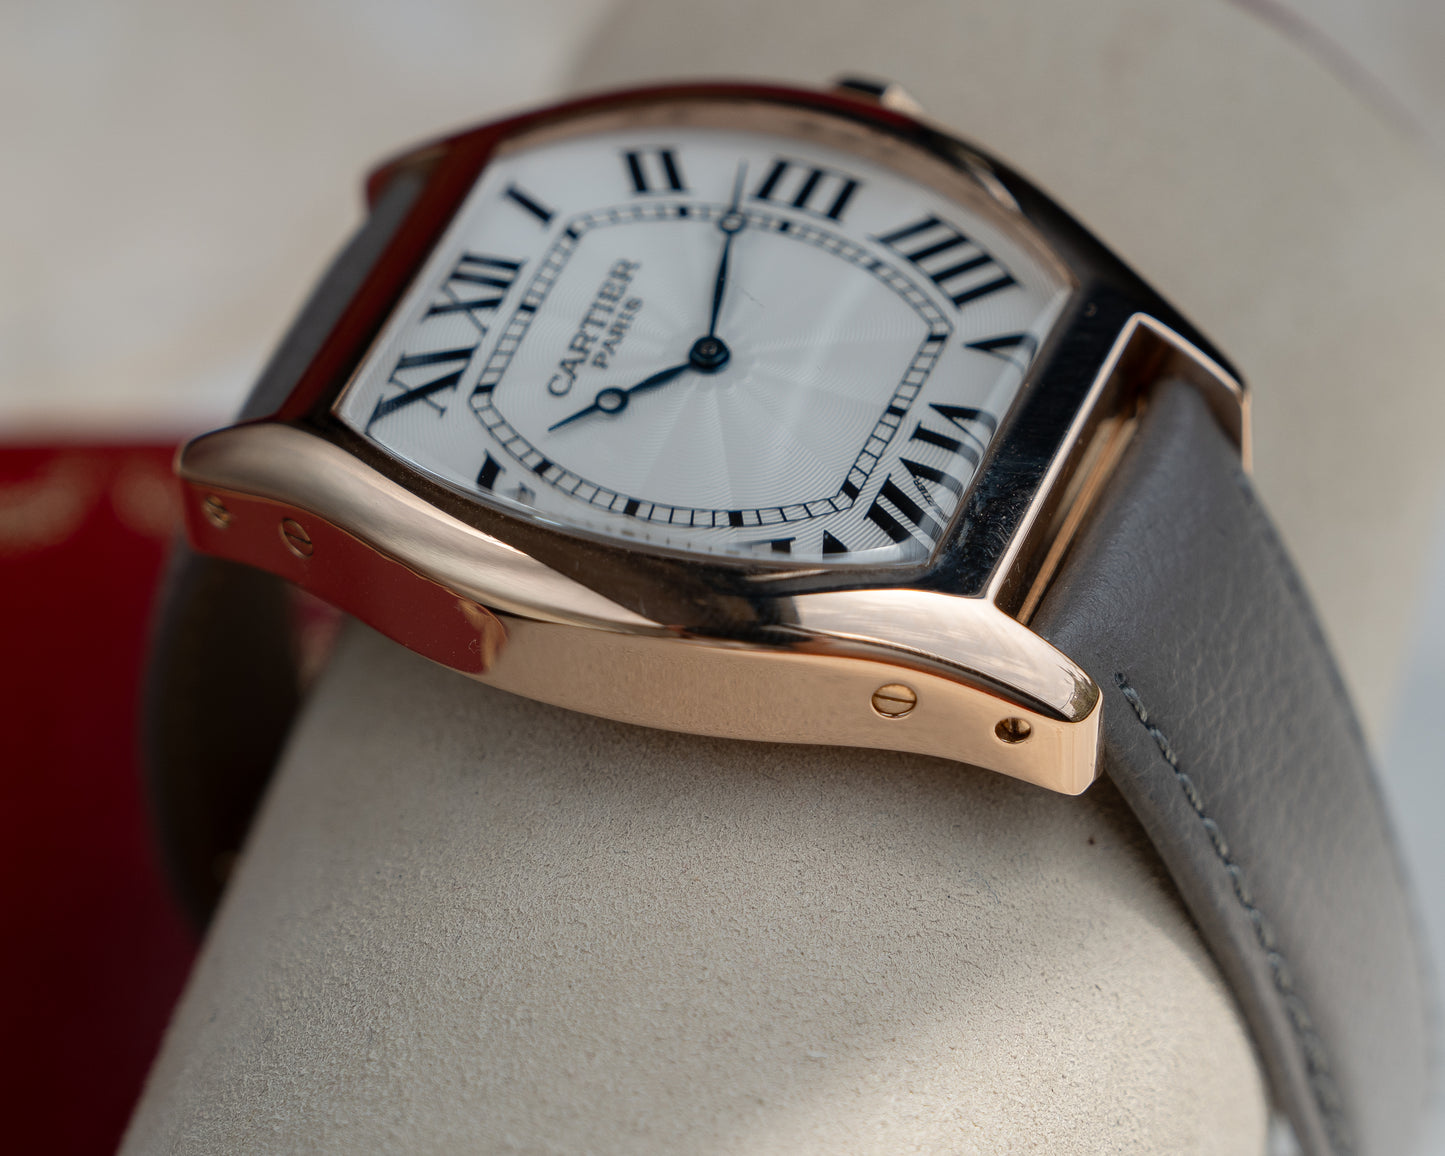 Cartier Tortue CPCP "Collection Prive", XL size in Rose Gold, ref 2763